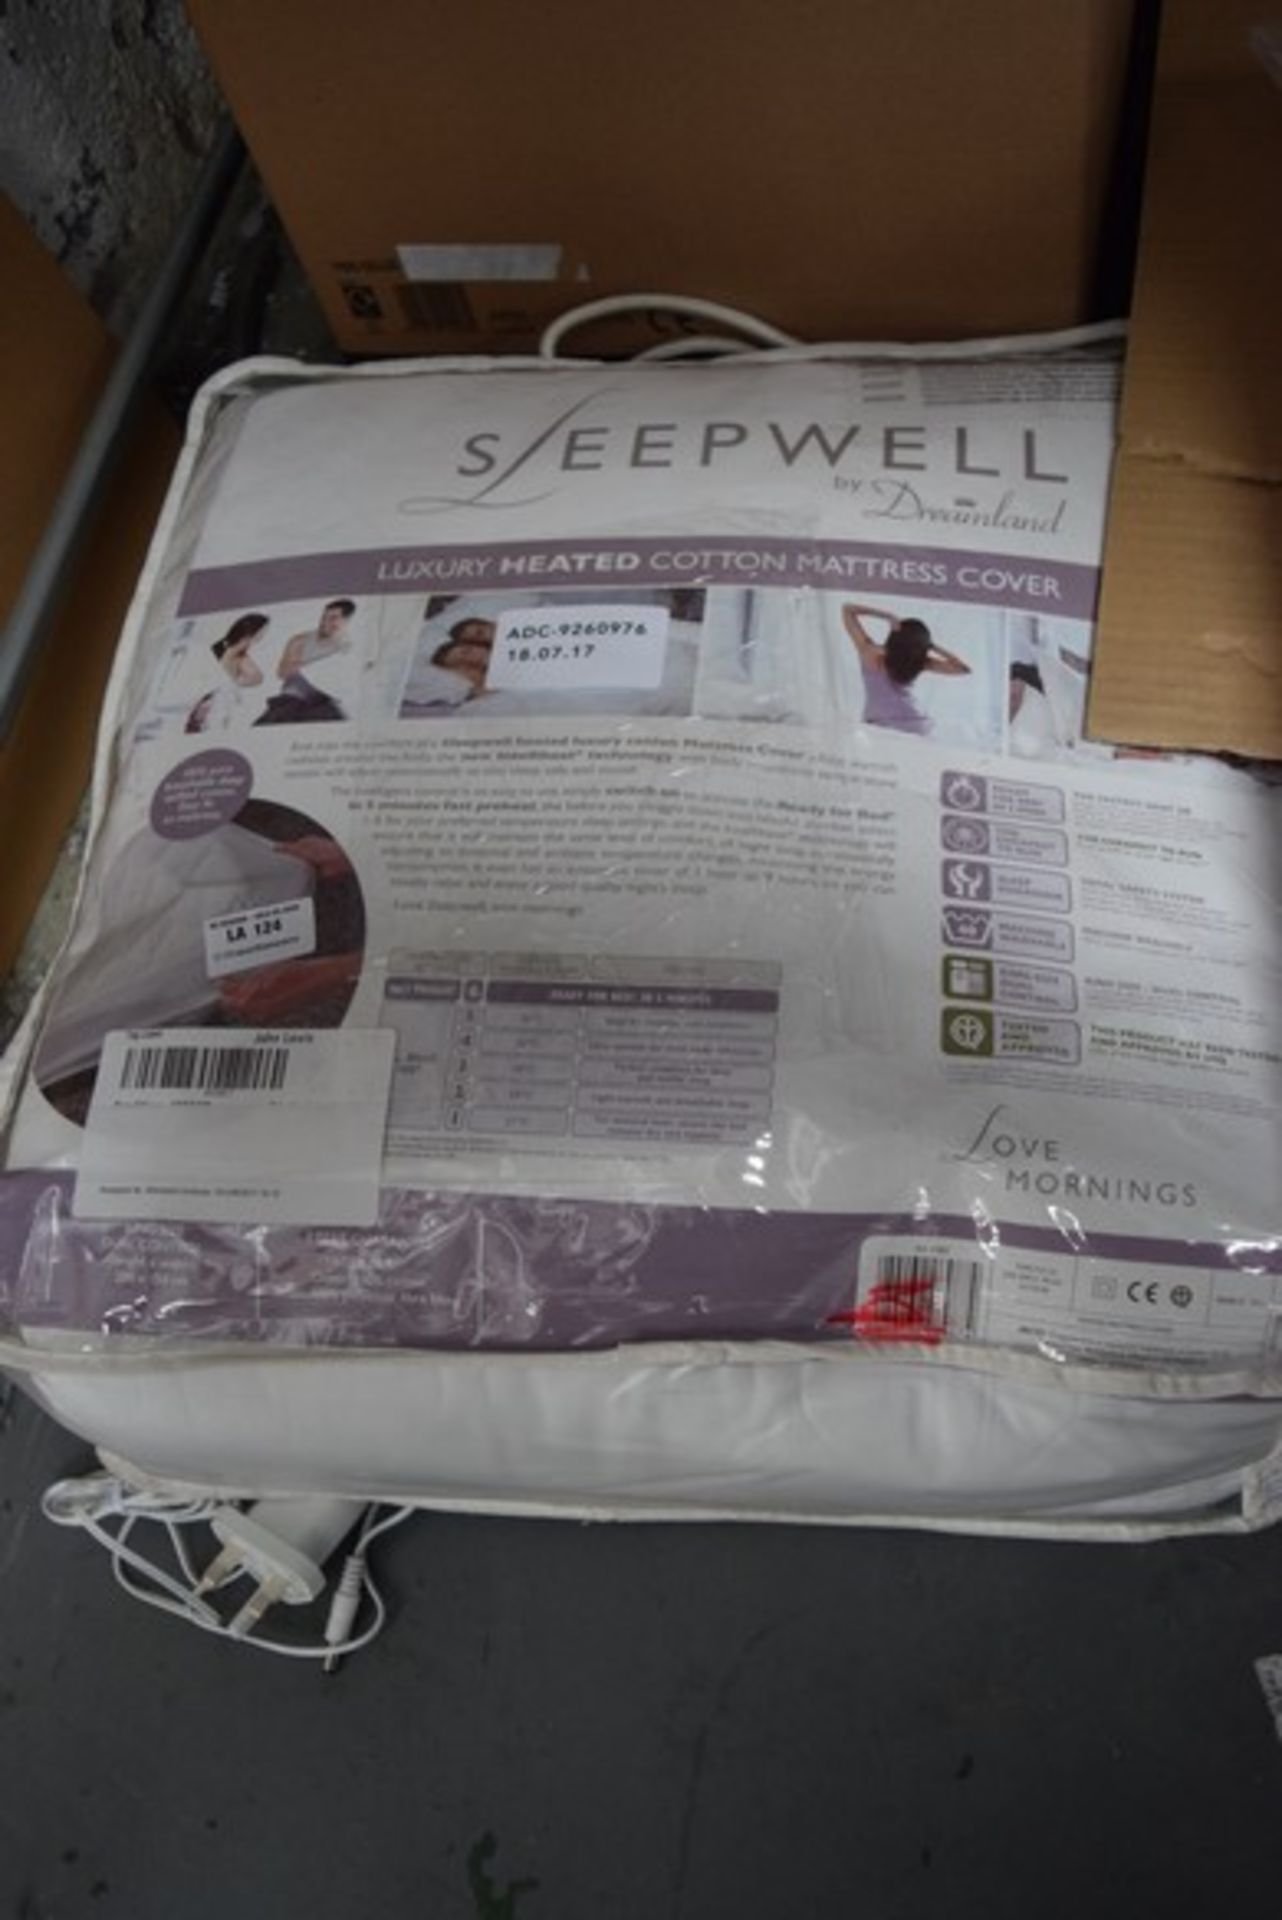 1 x SLEEPWELL BY DREAMLAND LUXURY HEATED COTTON MATTRESS COVER IN KING SIZE RRP £45 18.07.17 *PLEASE